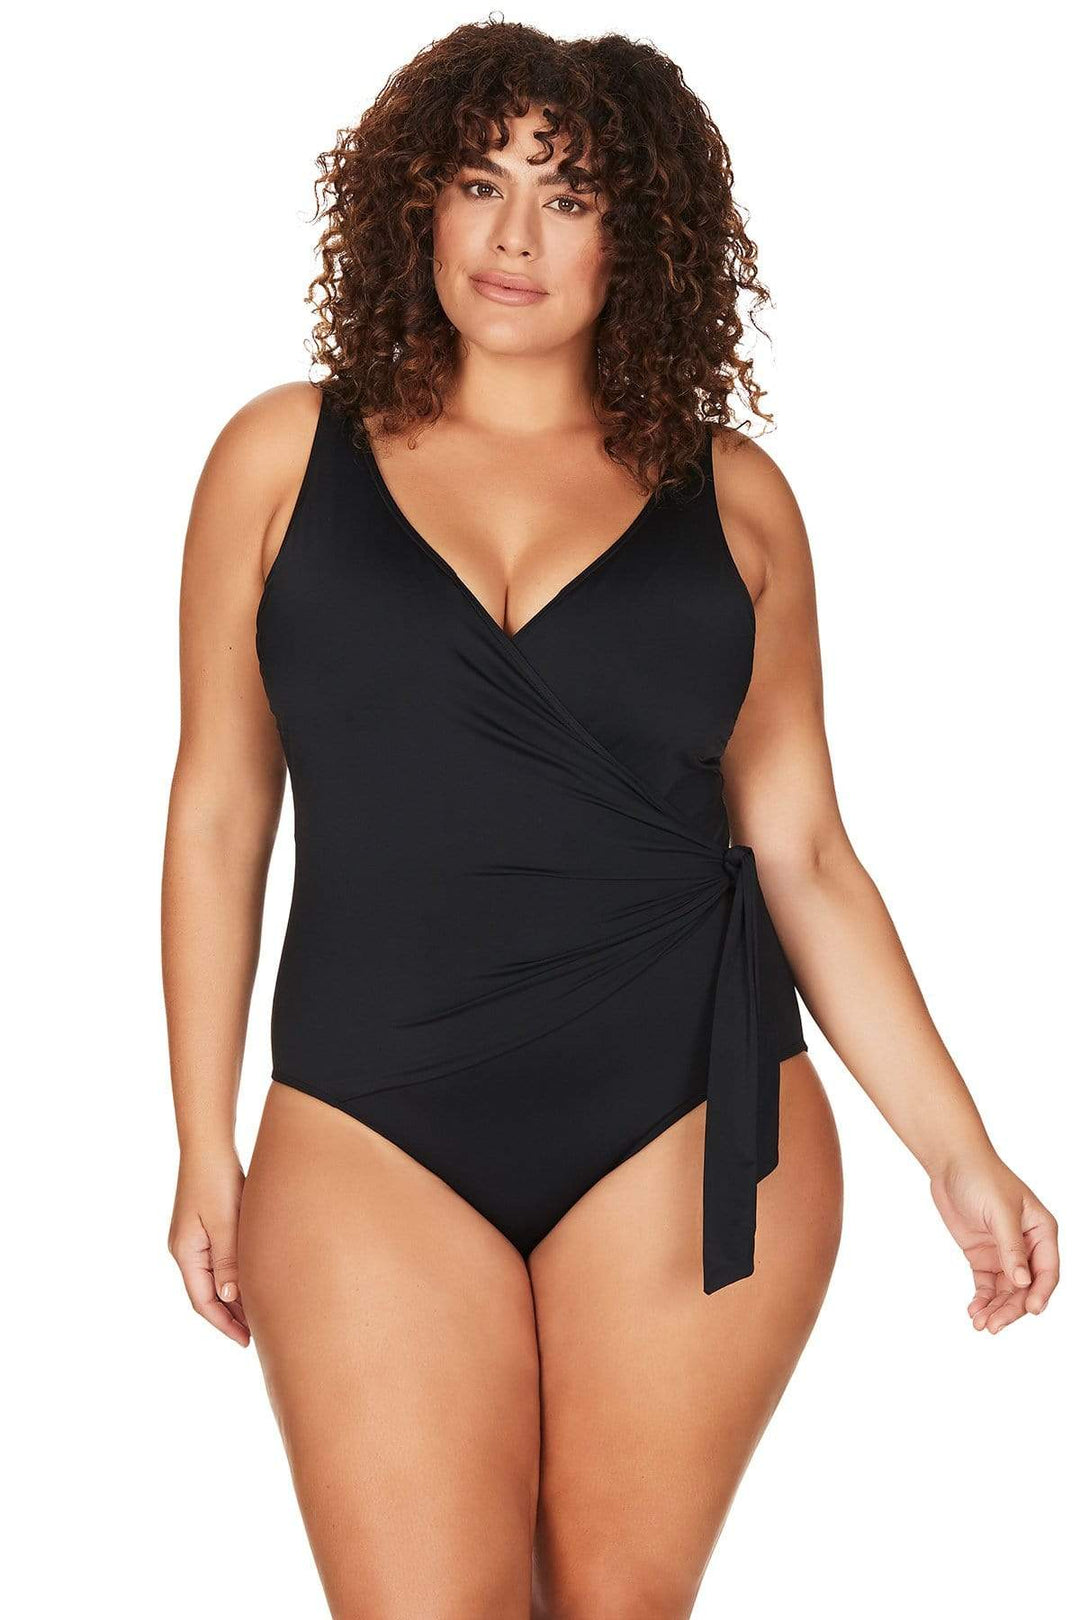 Sheer 2scoops Sheer When Wet Women's One Piece Swimsuit From Size Small to  Plus Size to 22, by Brigitewear -  Canada